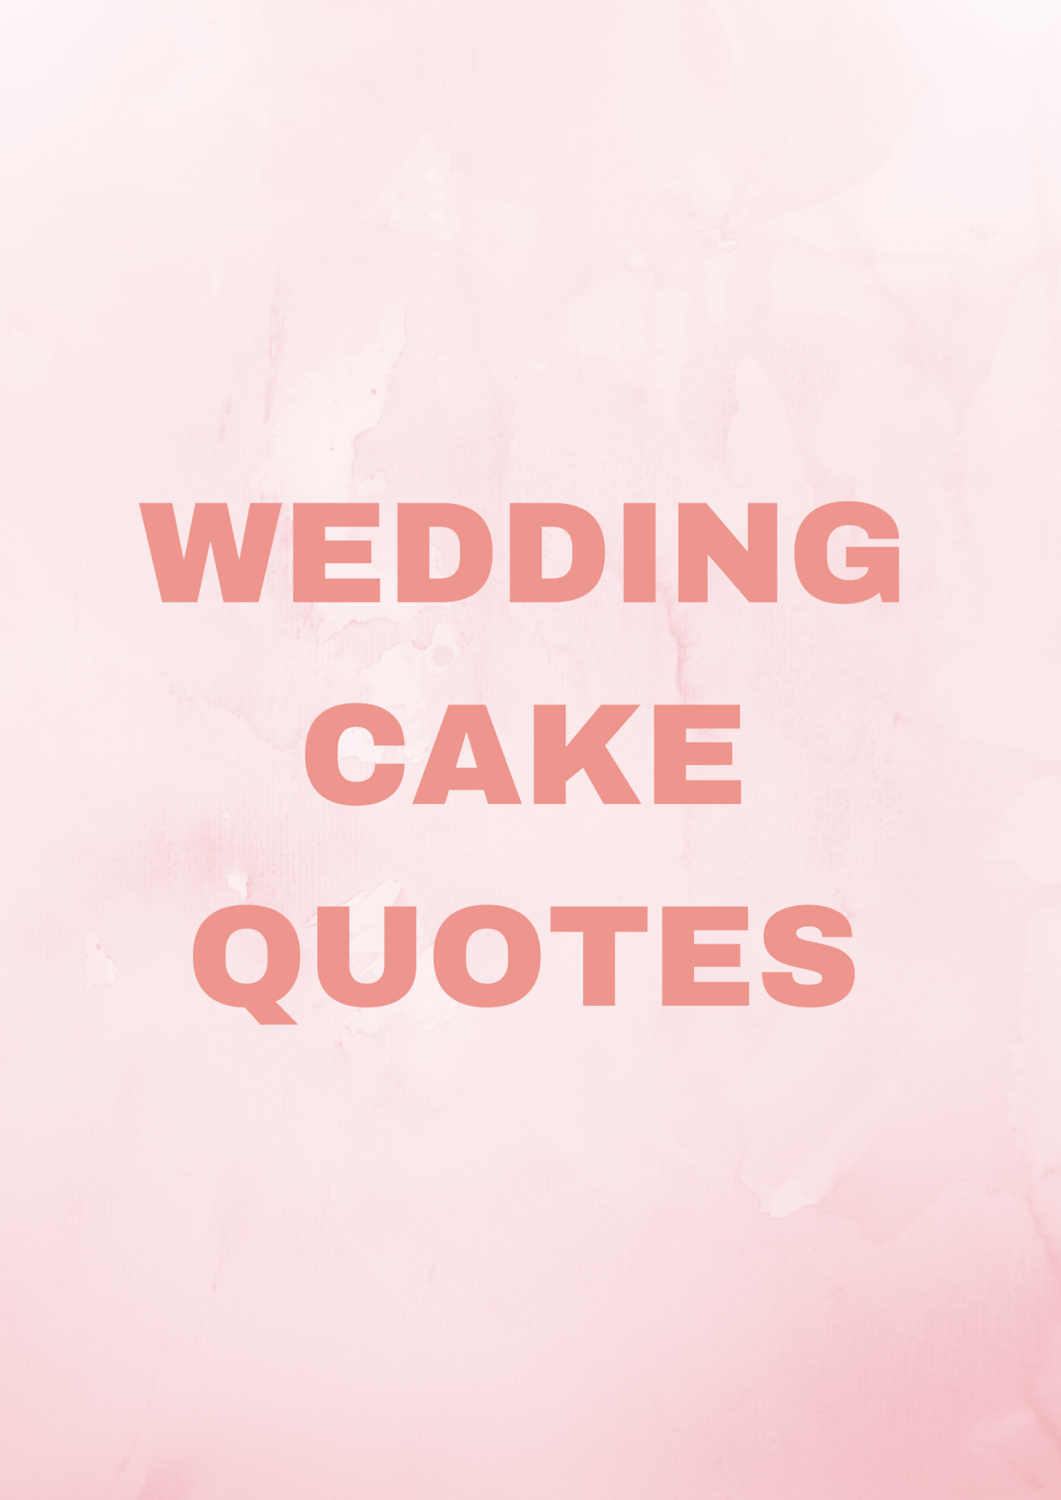 Request a Wedding Cake quote